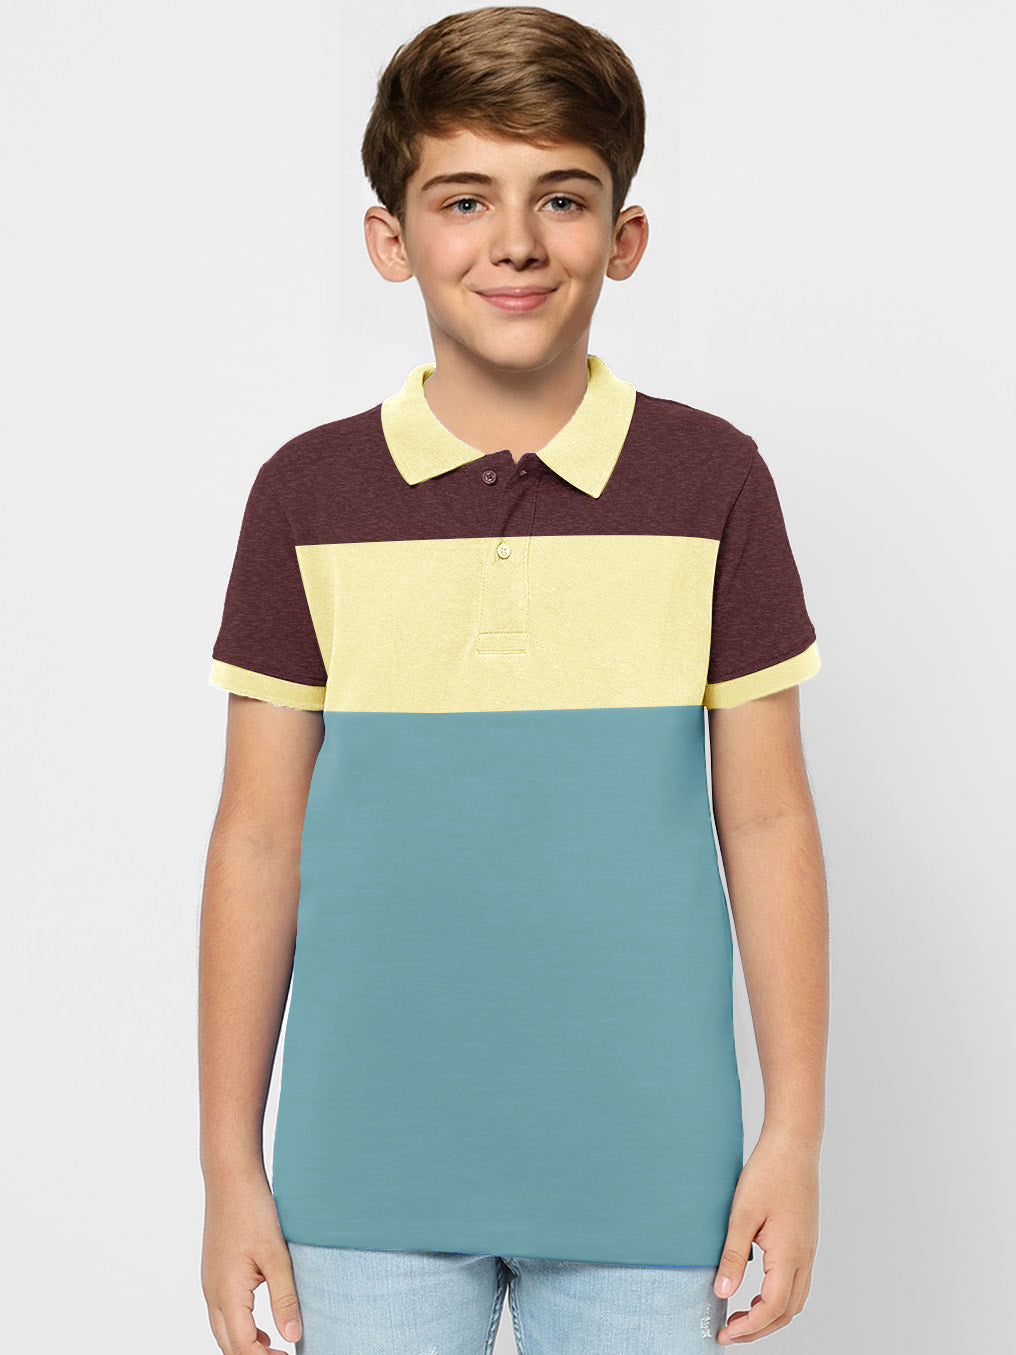 NXT Summer P.Q Polo Shirt For Kids-Bond Blue with Yellow & Burgundy-SP1690/RT2407